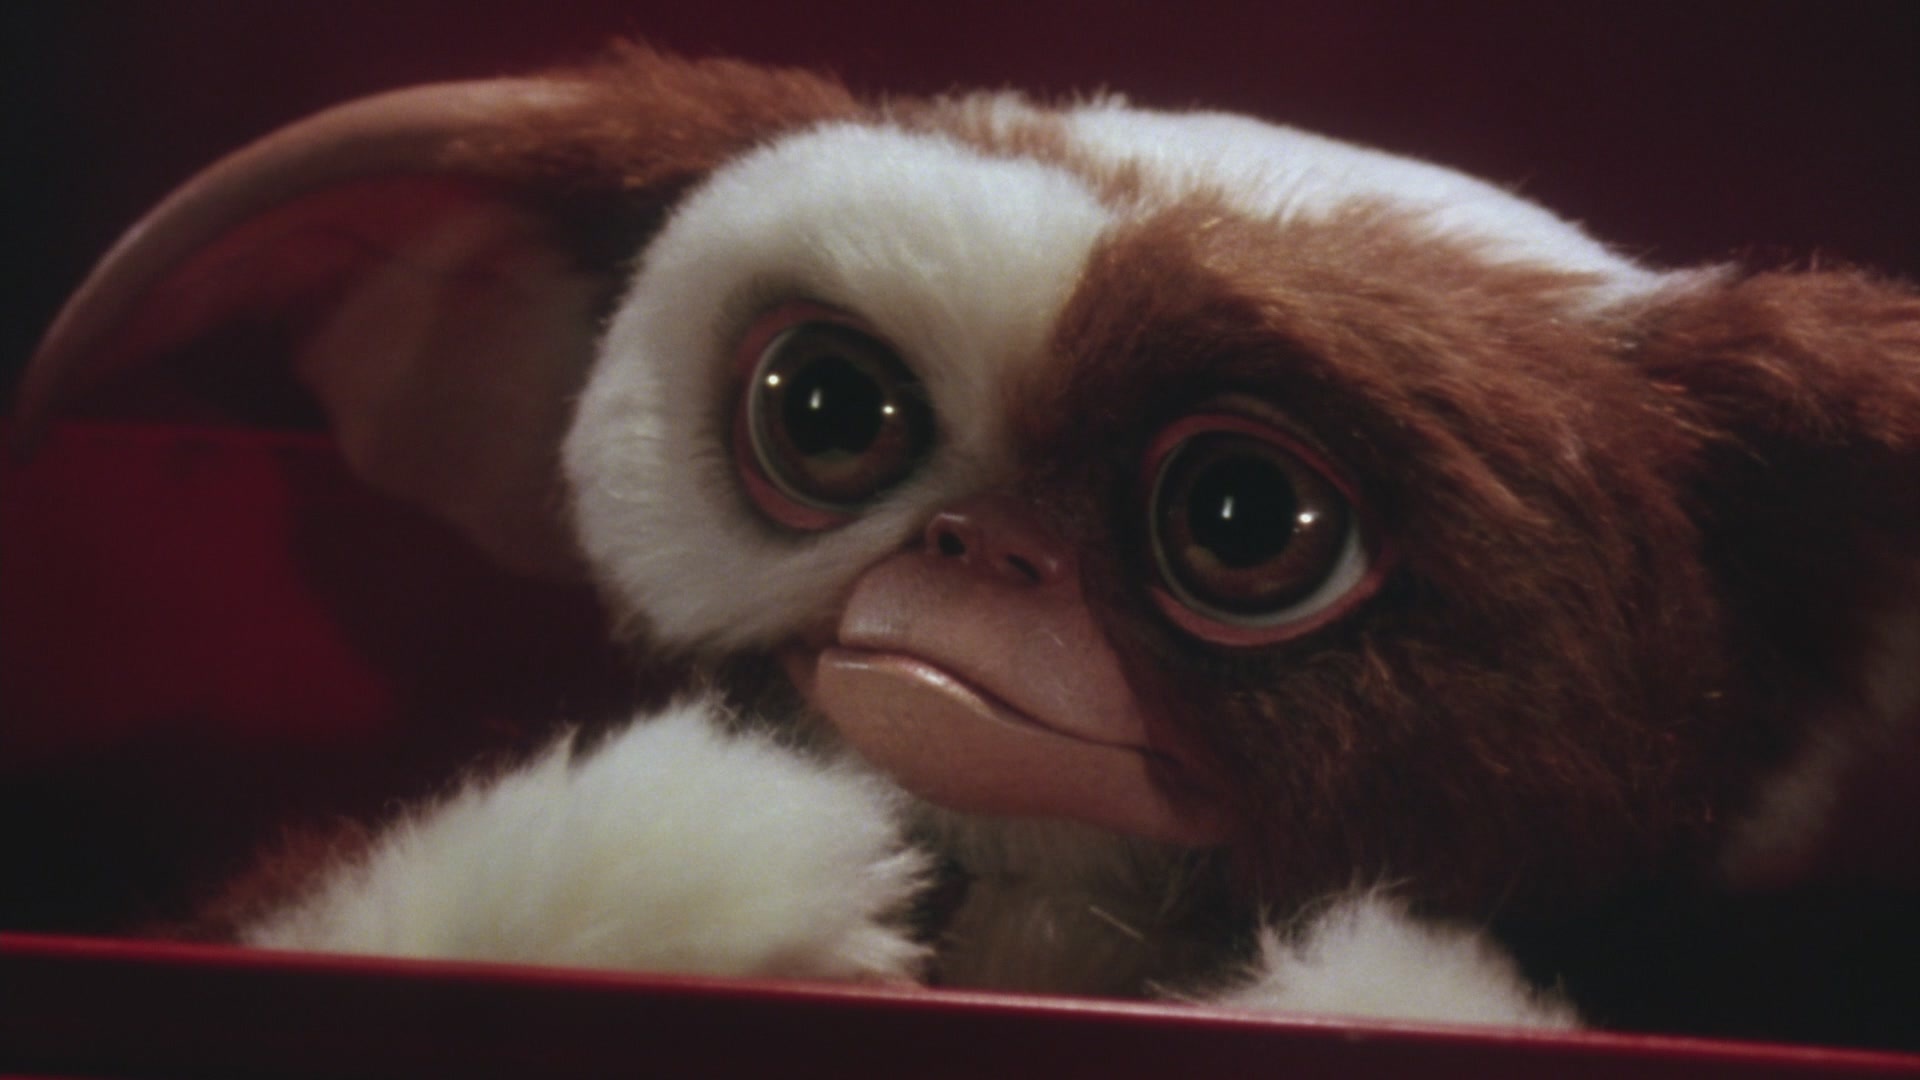 Gremlin Gizmo: The center of large merchandising campaigns and opts for black comedy, An American film. 1920x1080 Full HD Wallpaper.